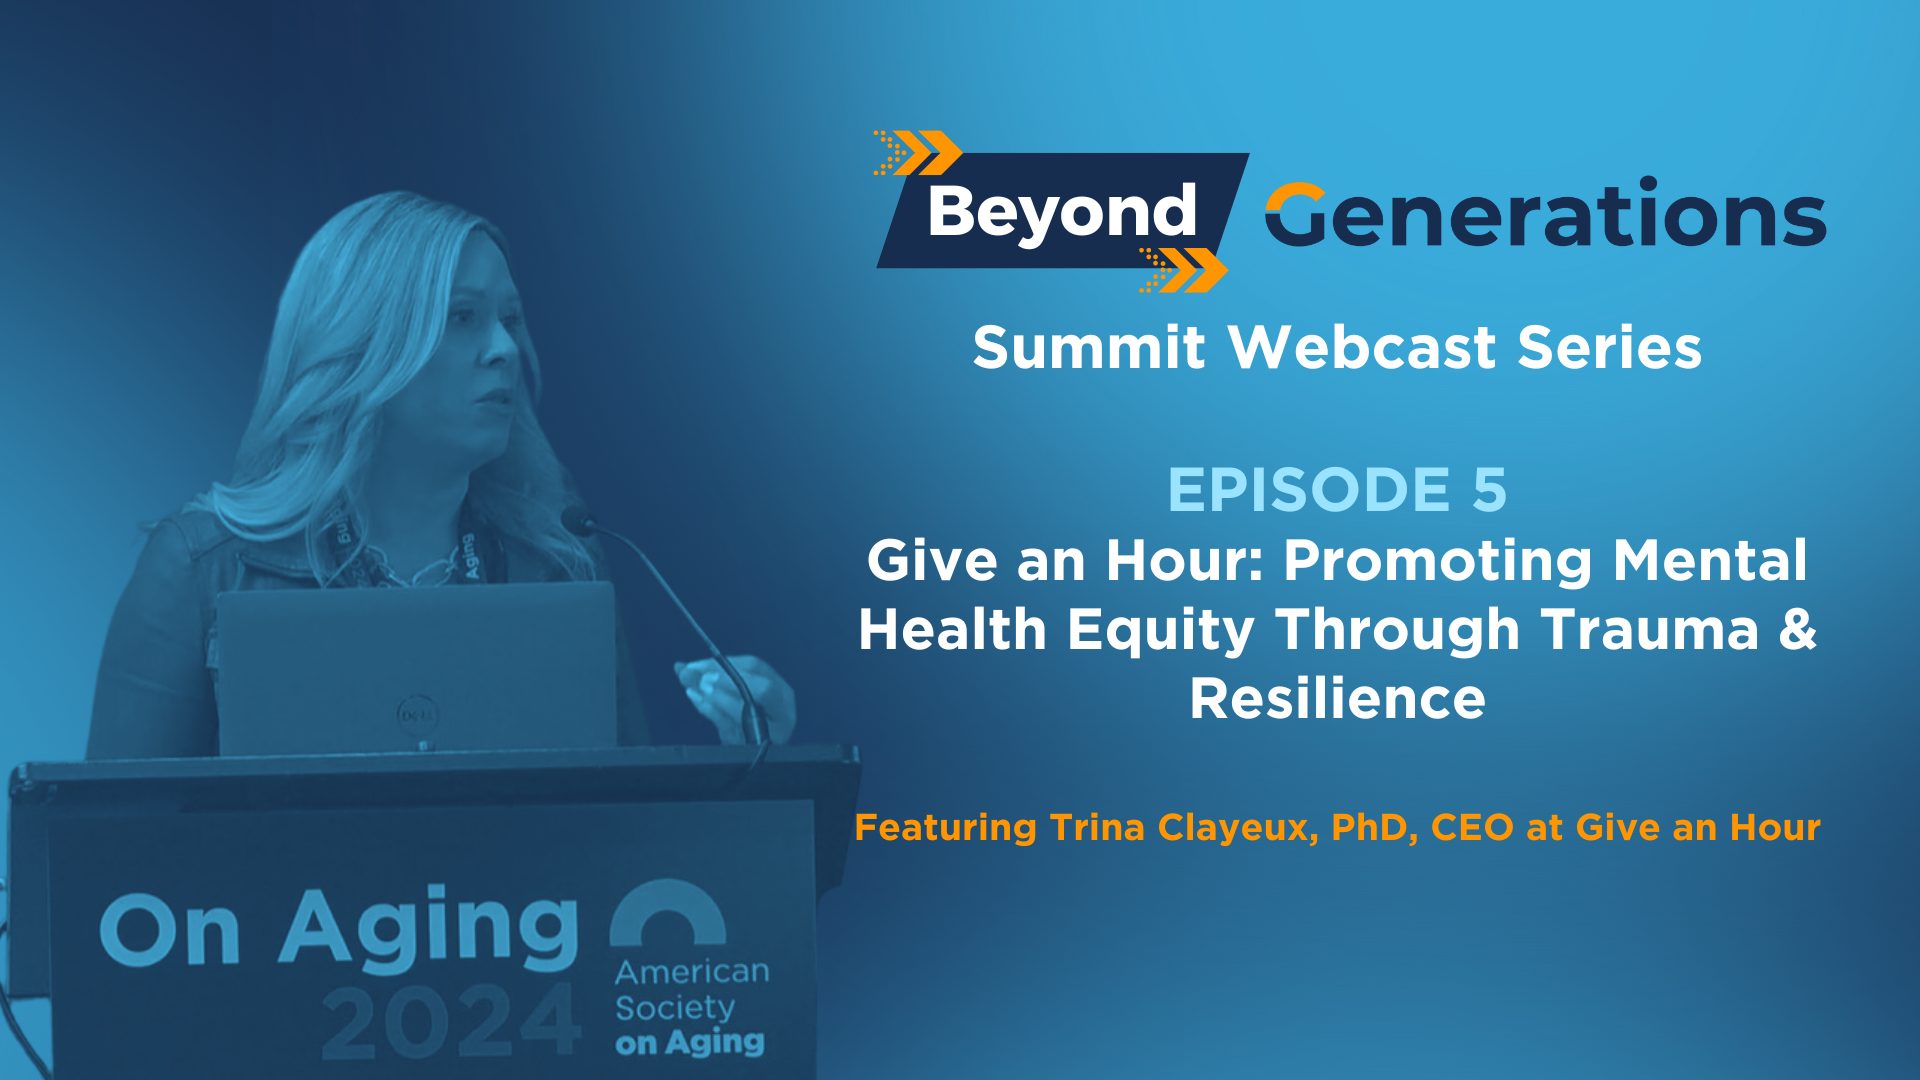 Episode 5: Give an Hour: Promoting Mental Health Equity Through Trauma & Resilience